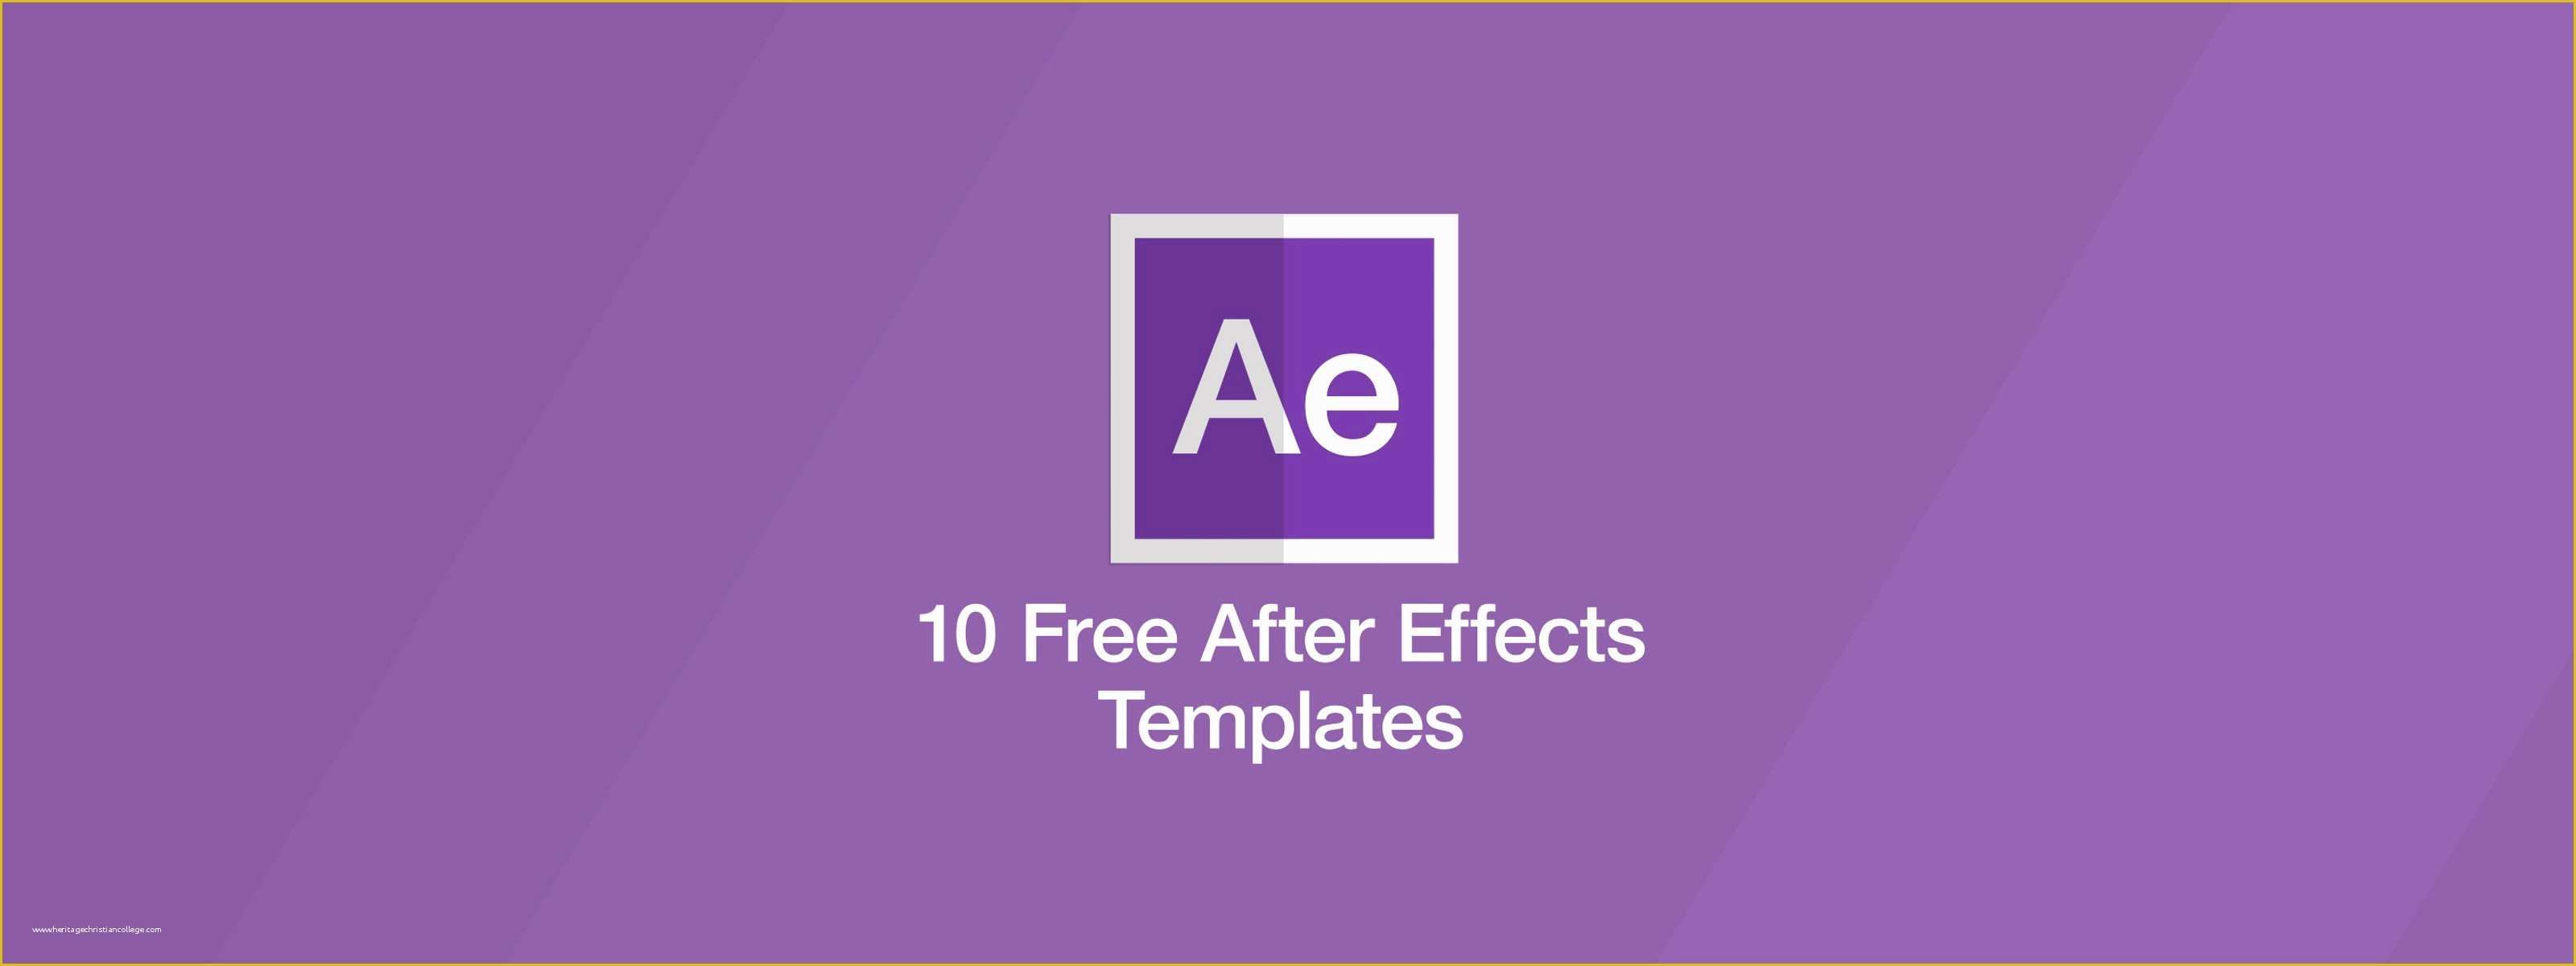 Download after Effects Templates for Free Of 10 Free after Effects Templates